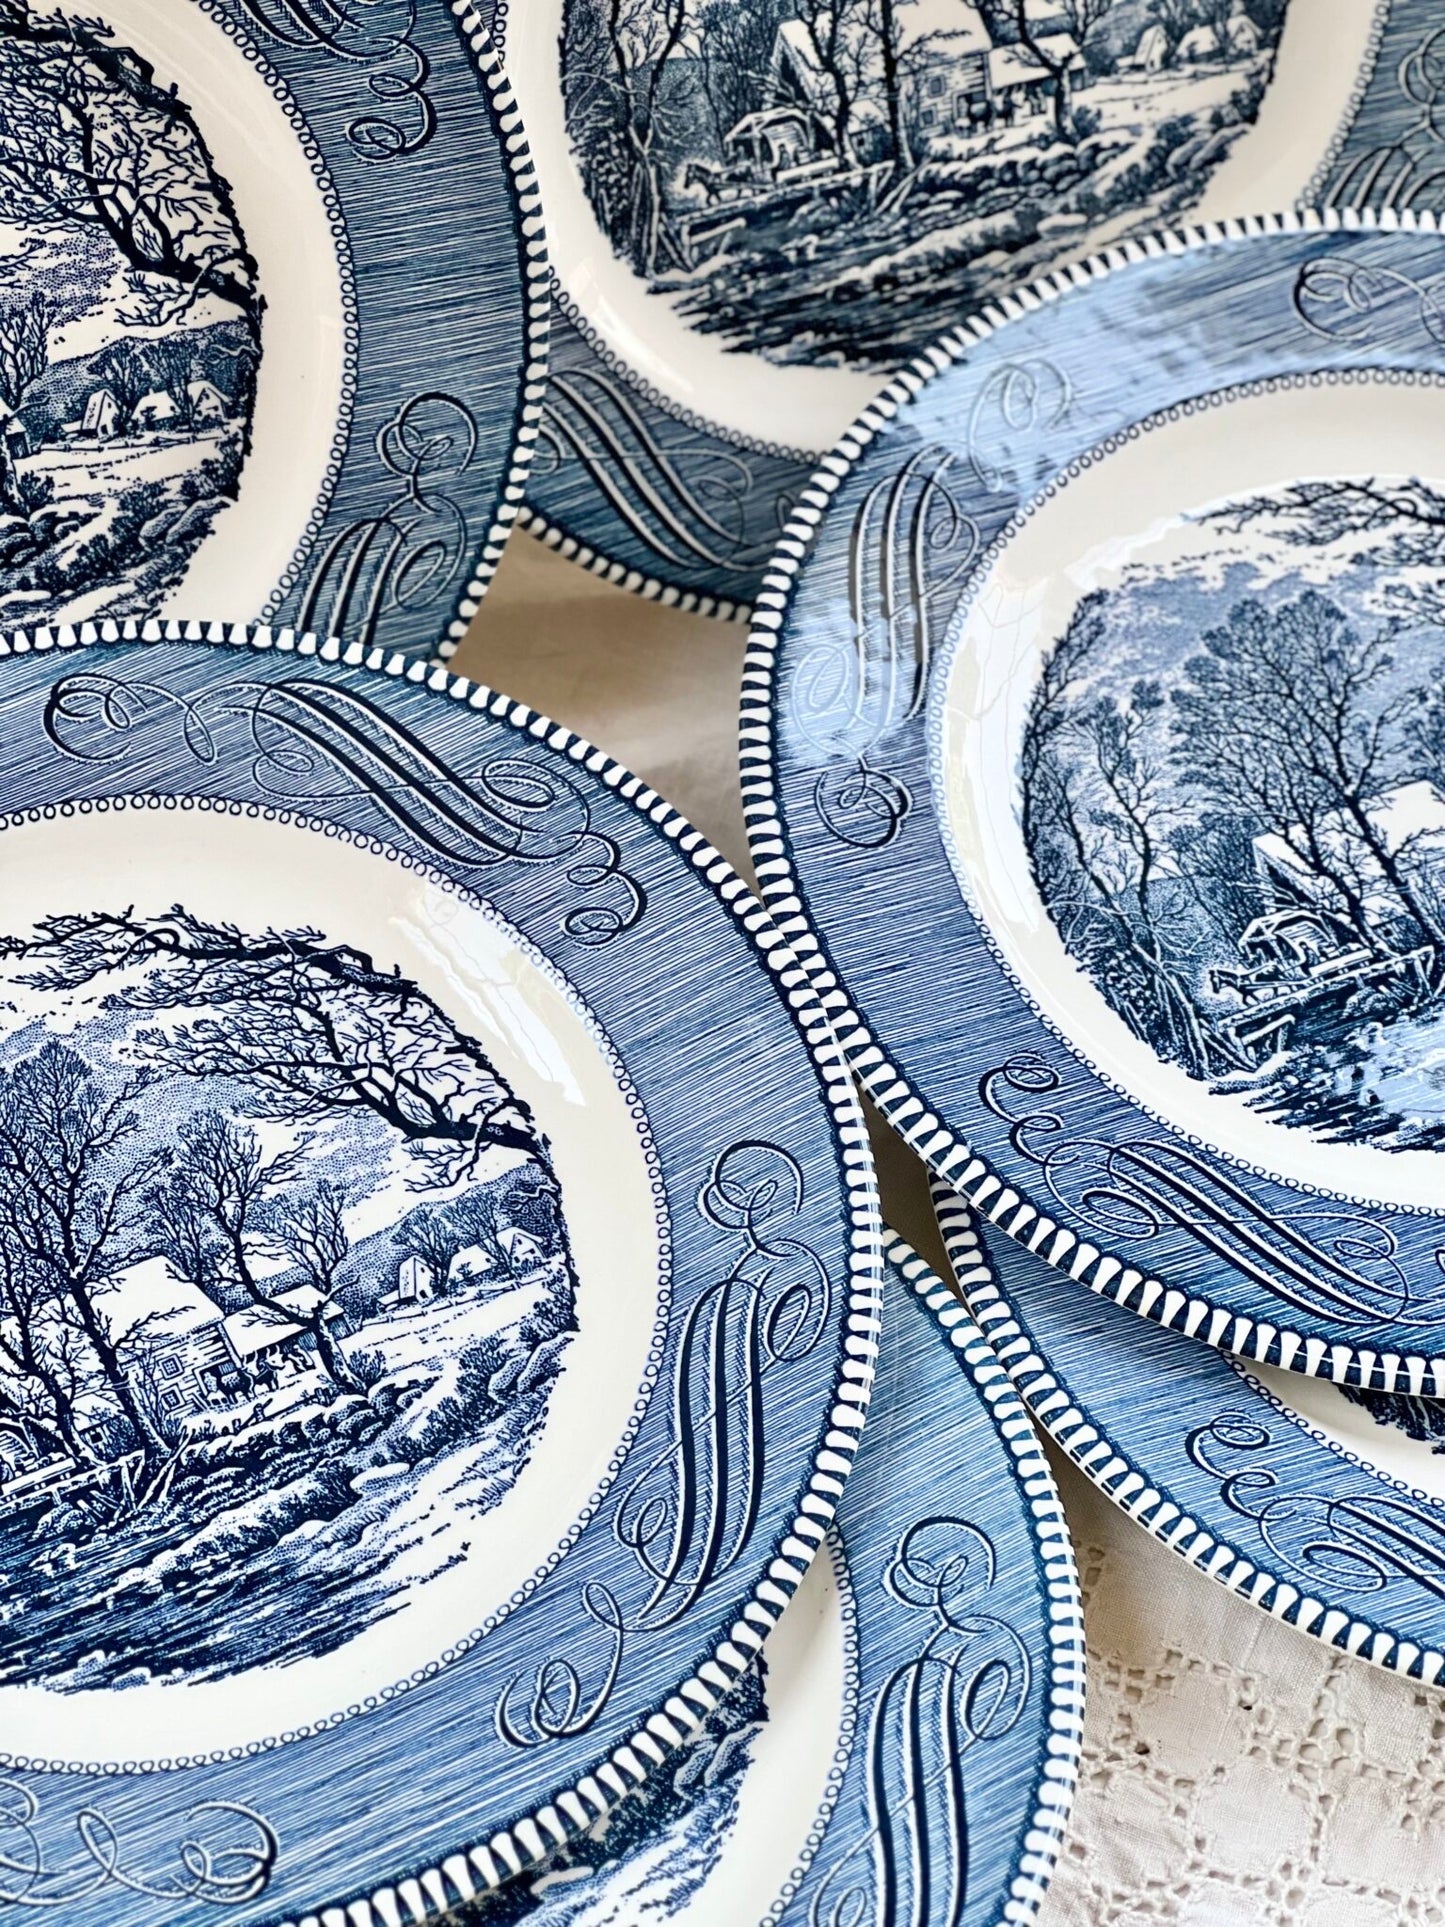 Set Of 6, Currier & Ives “The Old Grist Mill” By Royal China, Ironstone Dinner Plates